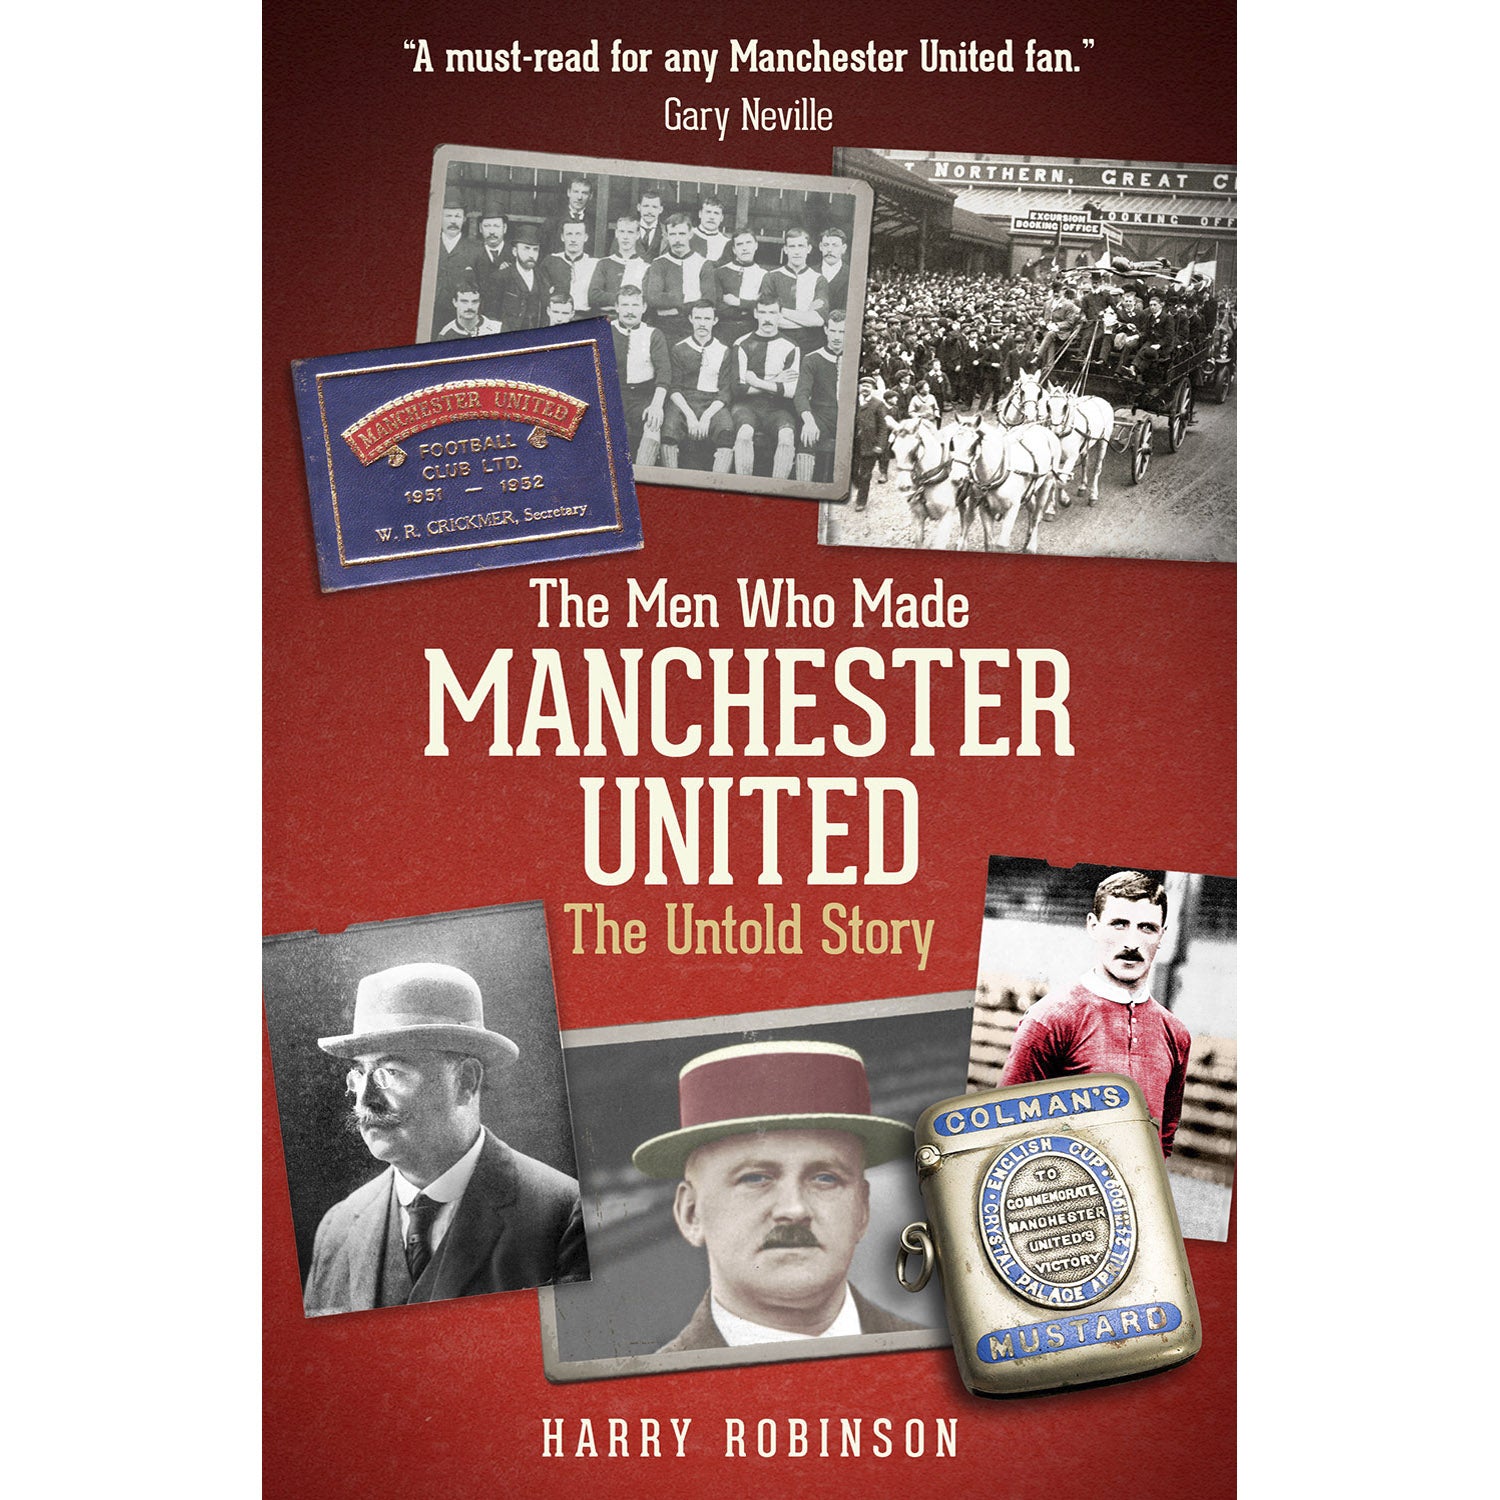 The Men Who Made Manchester United – The Untold Story